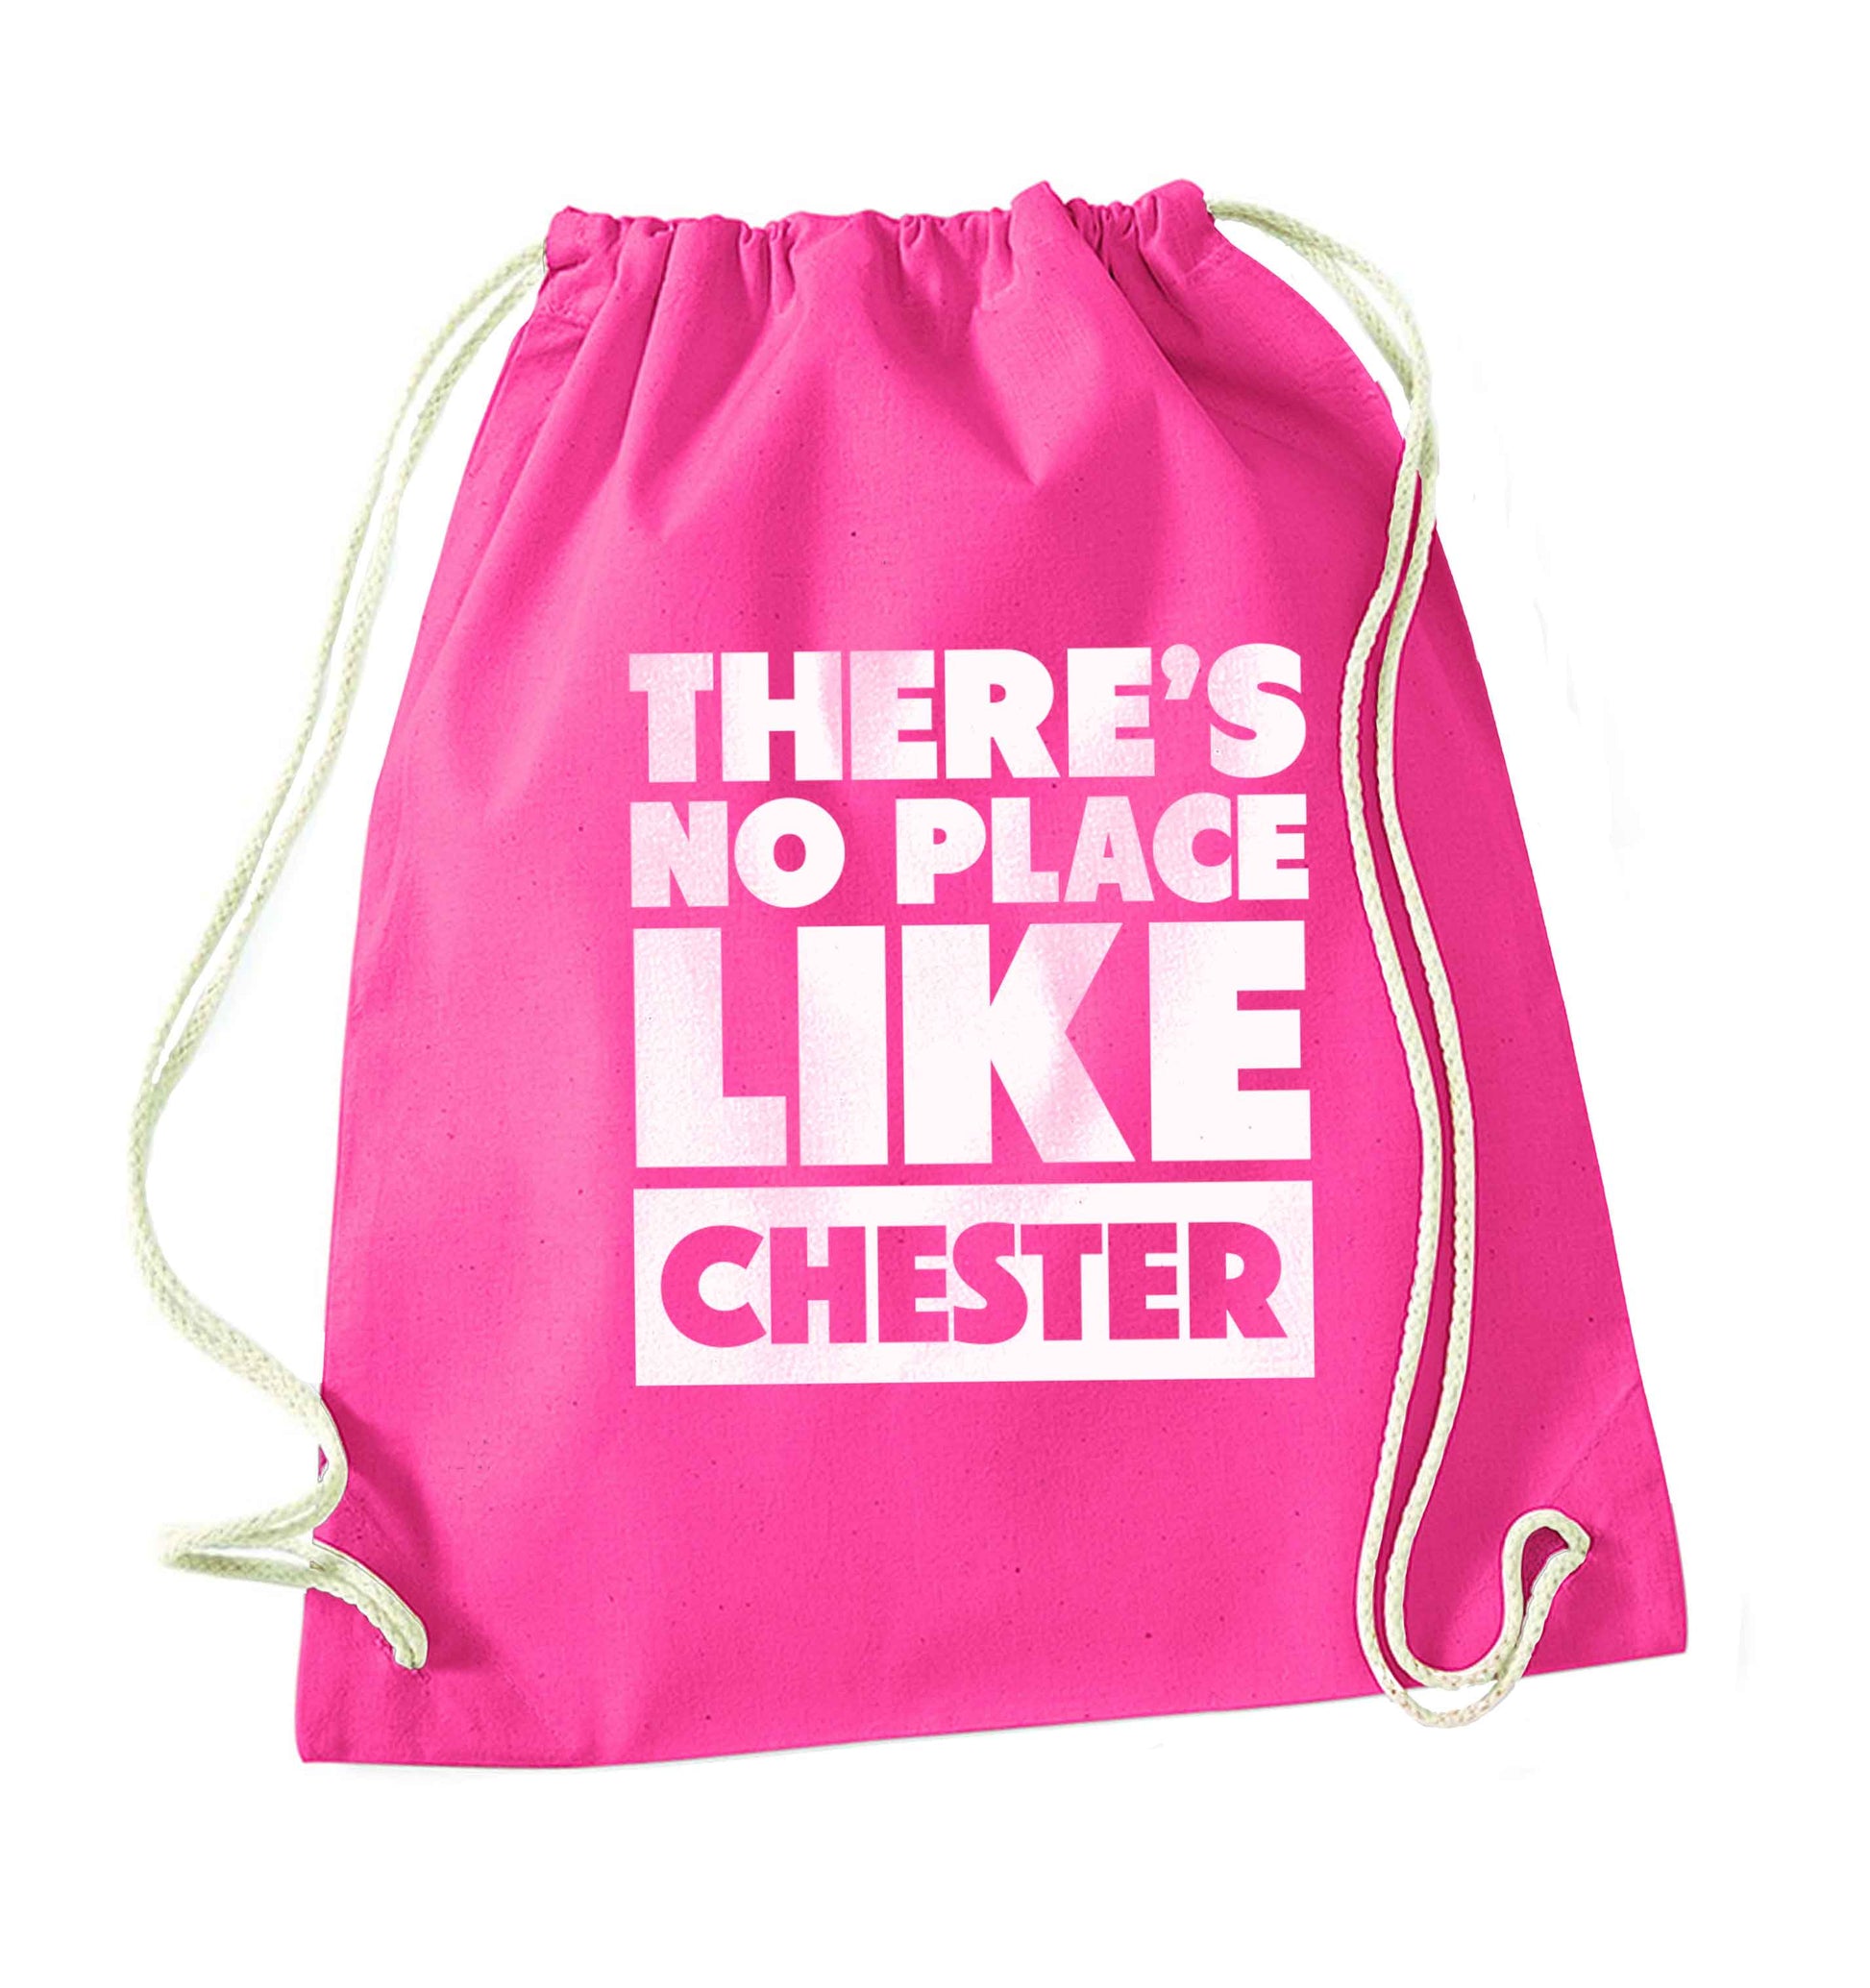 There's no place like Chester pink drawstring bag